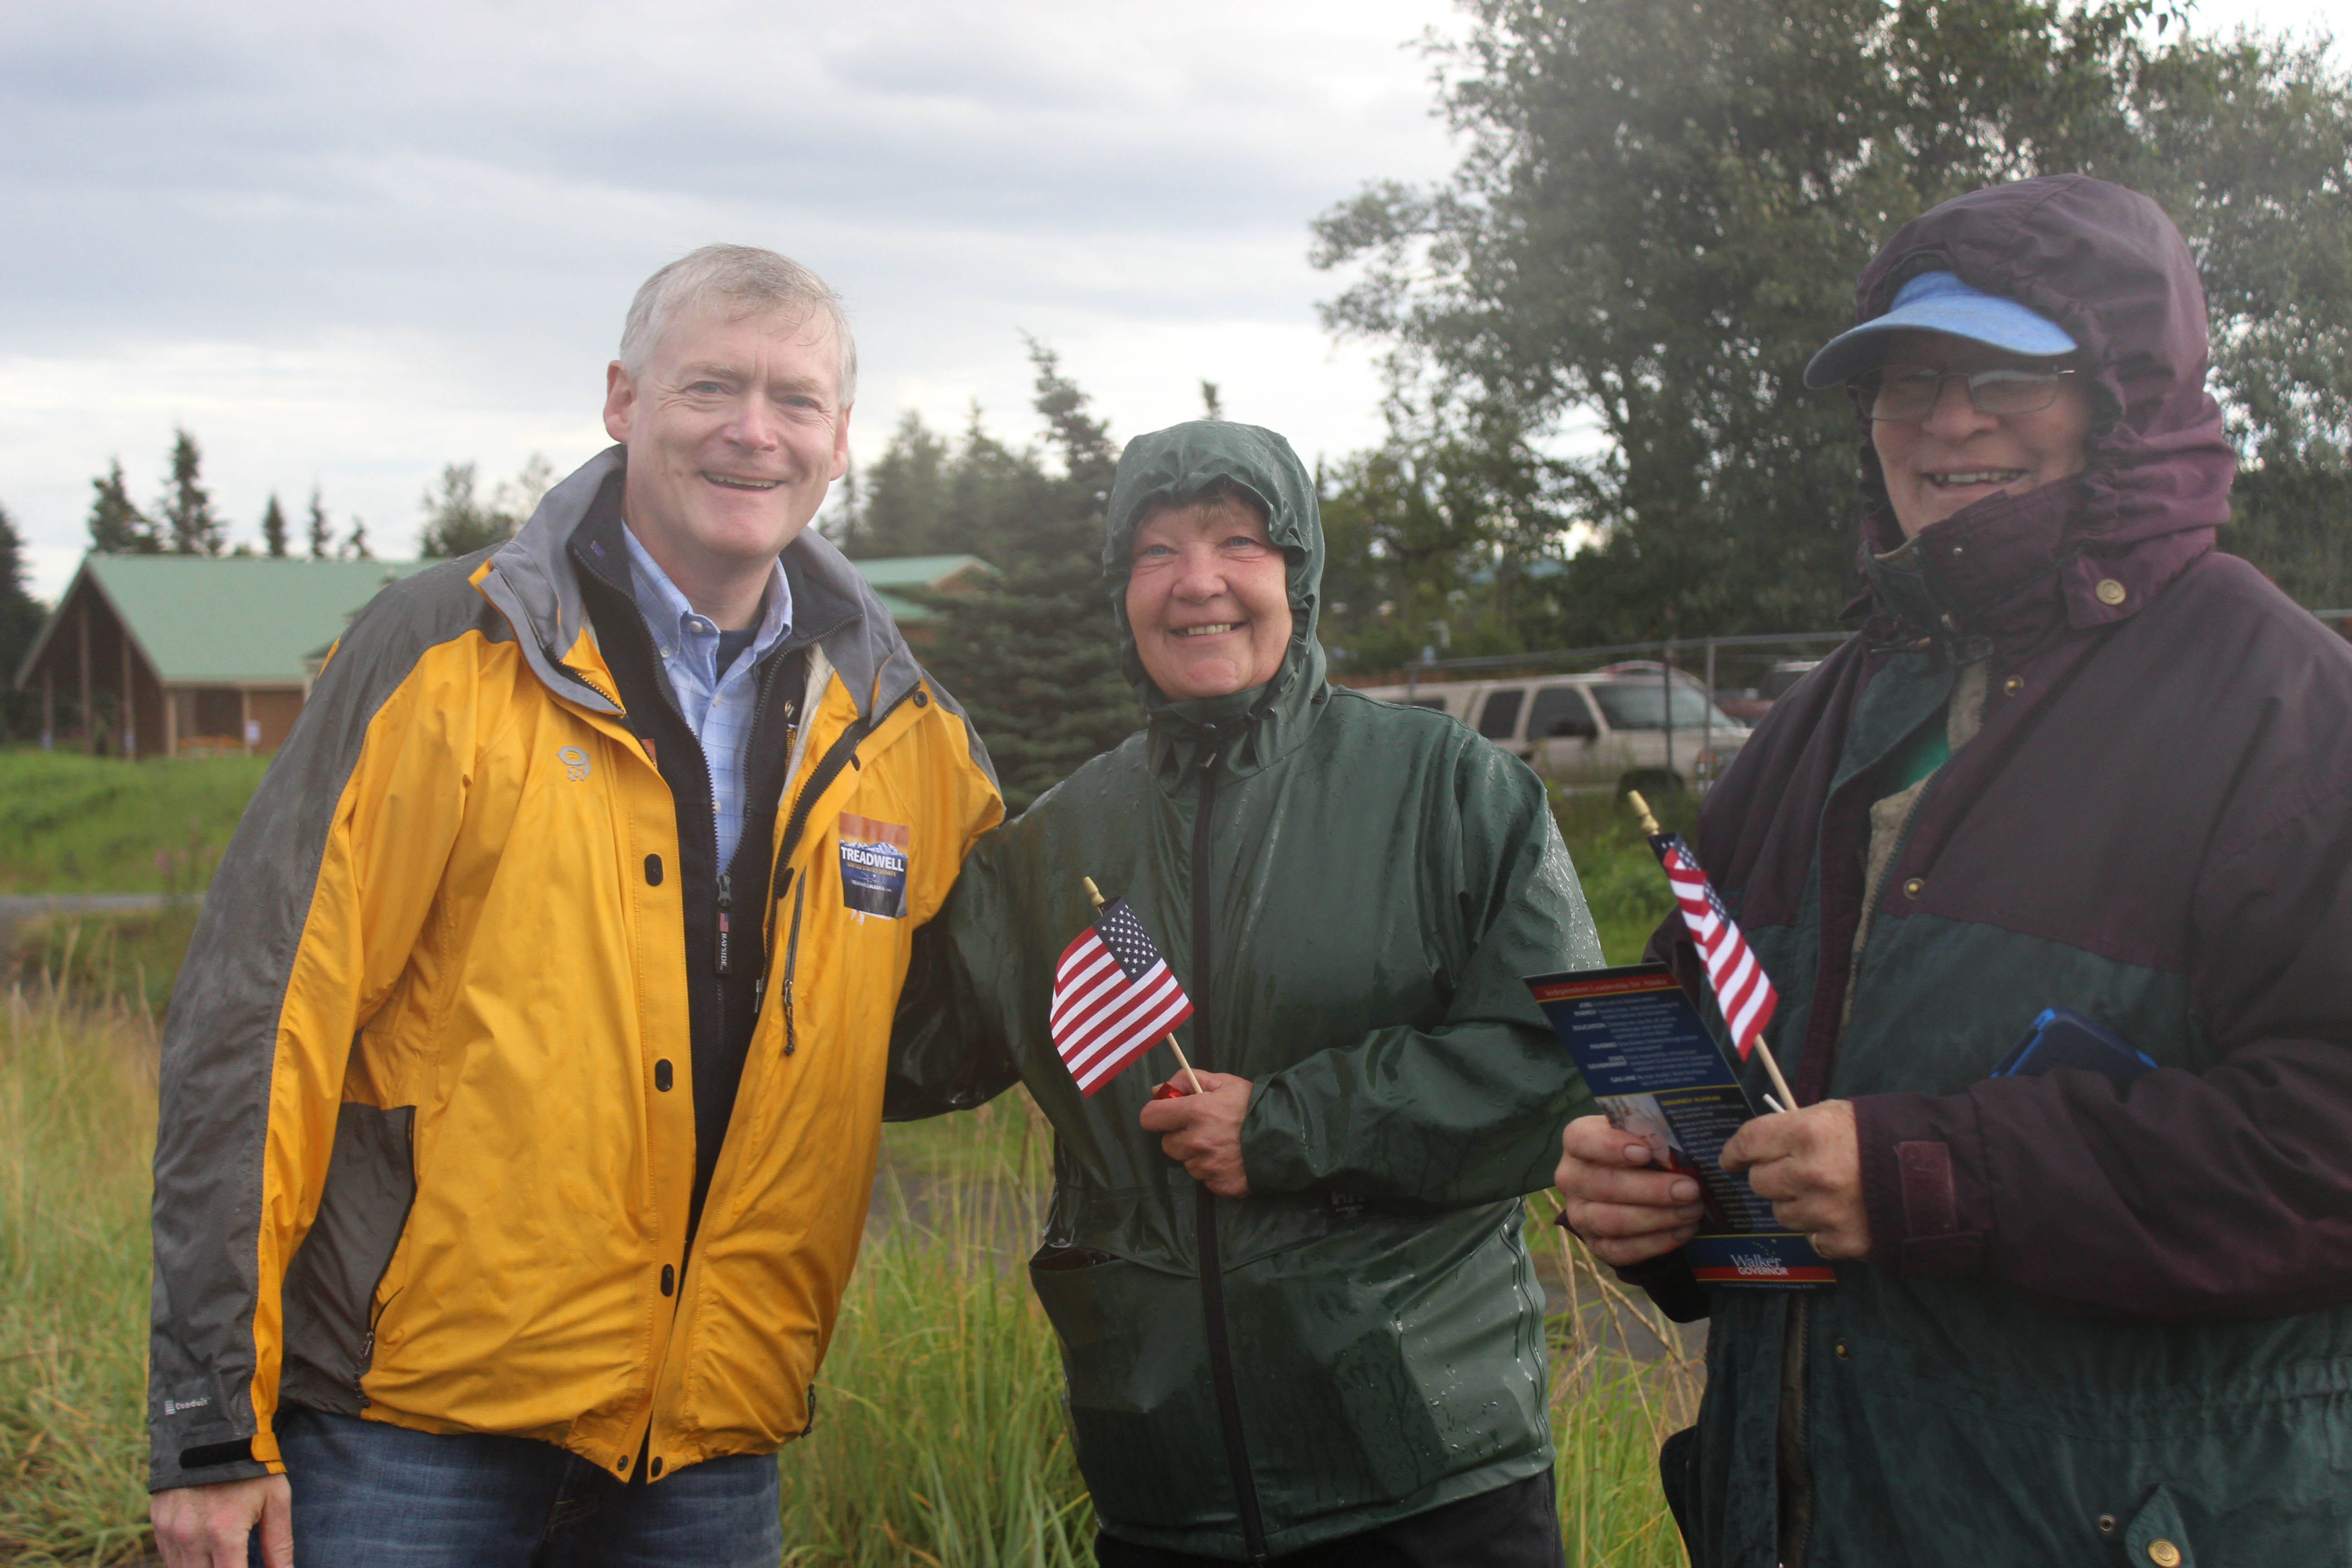 Mead Treadwell, Republican candidate for U.S. Senate, greets spectators at the Kenai Peninsula Fair parade in Ninilchik on Saturday morning.-Photo by McKibben Jackinsky; Homer News